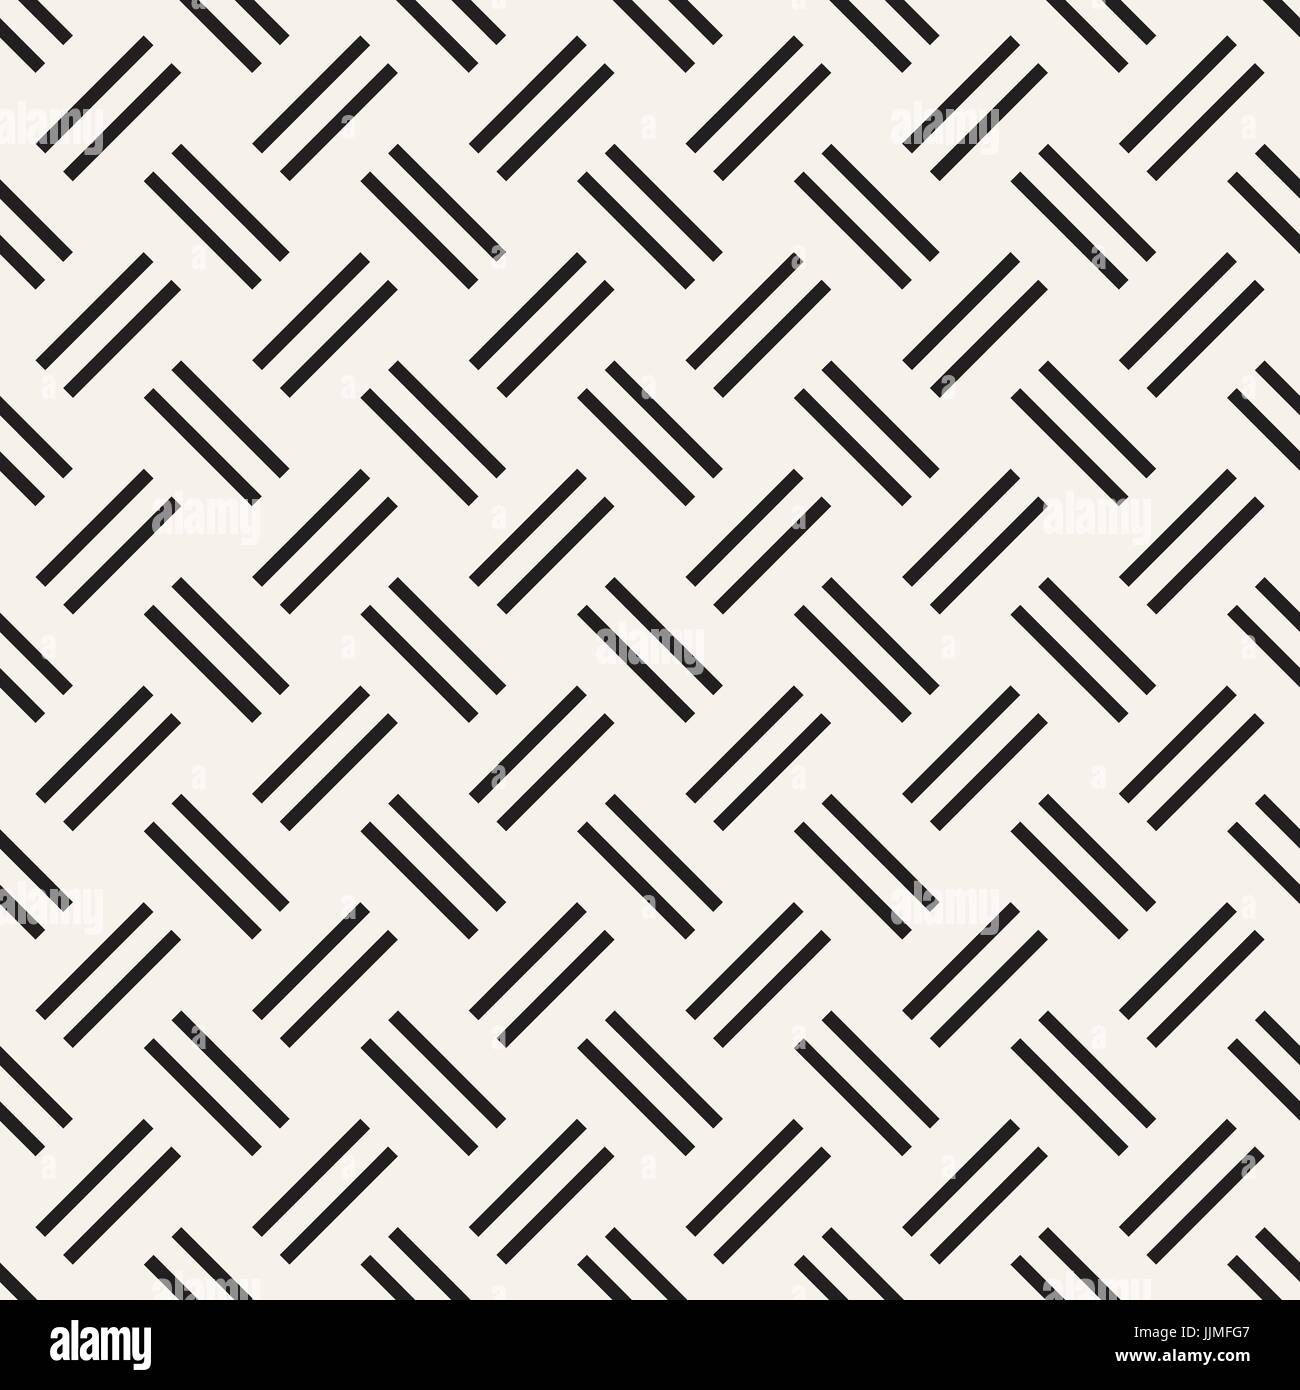 Crosshatch vector seamless geometric pattern. Crossed graphic rectangles background. Checkered motif. Seamless black and white texture of crosshatched lines. Trellis simple fabric print. Stock Vector